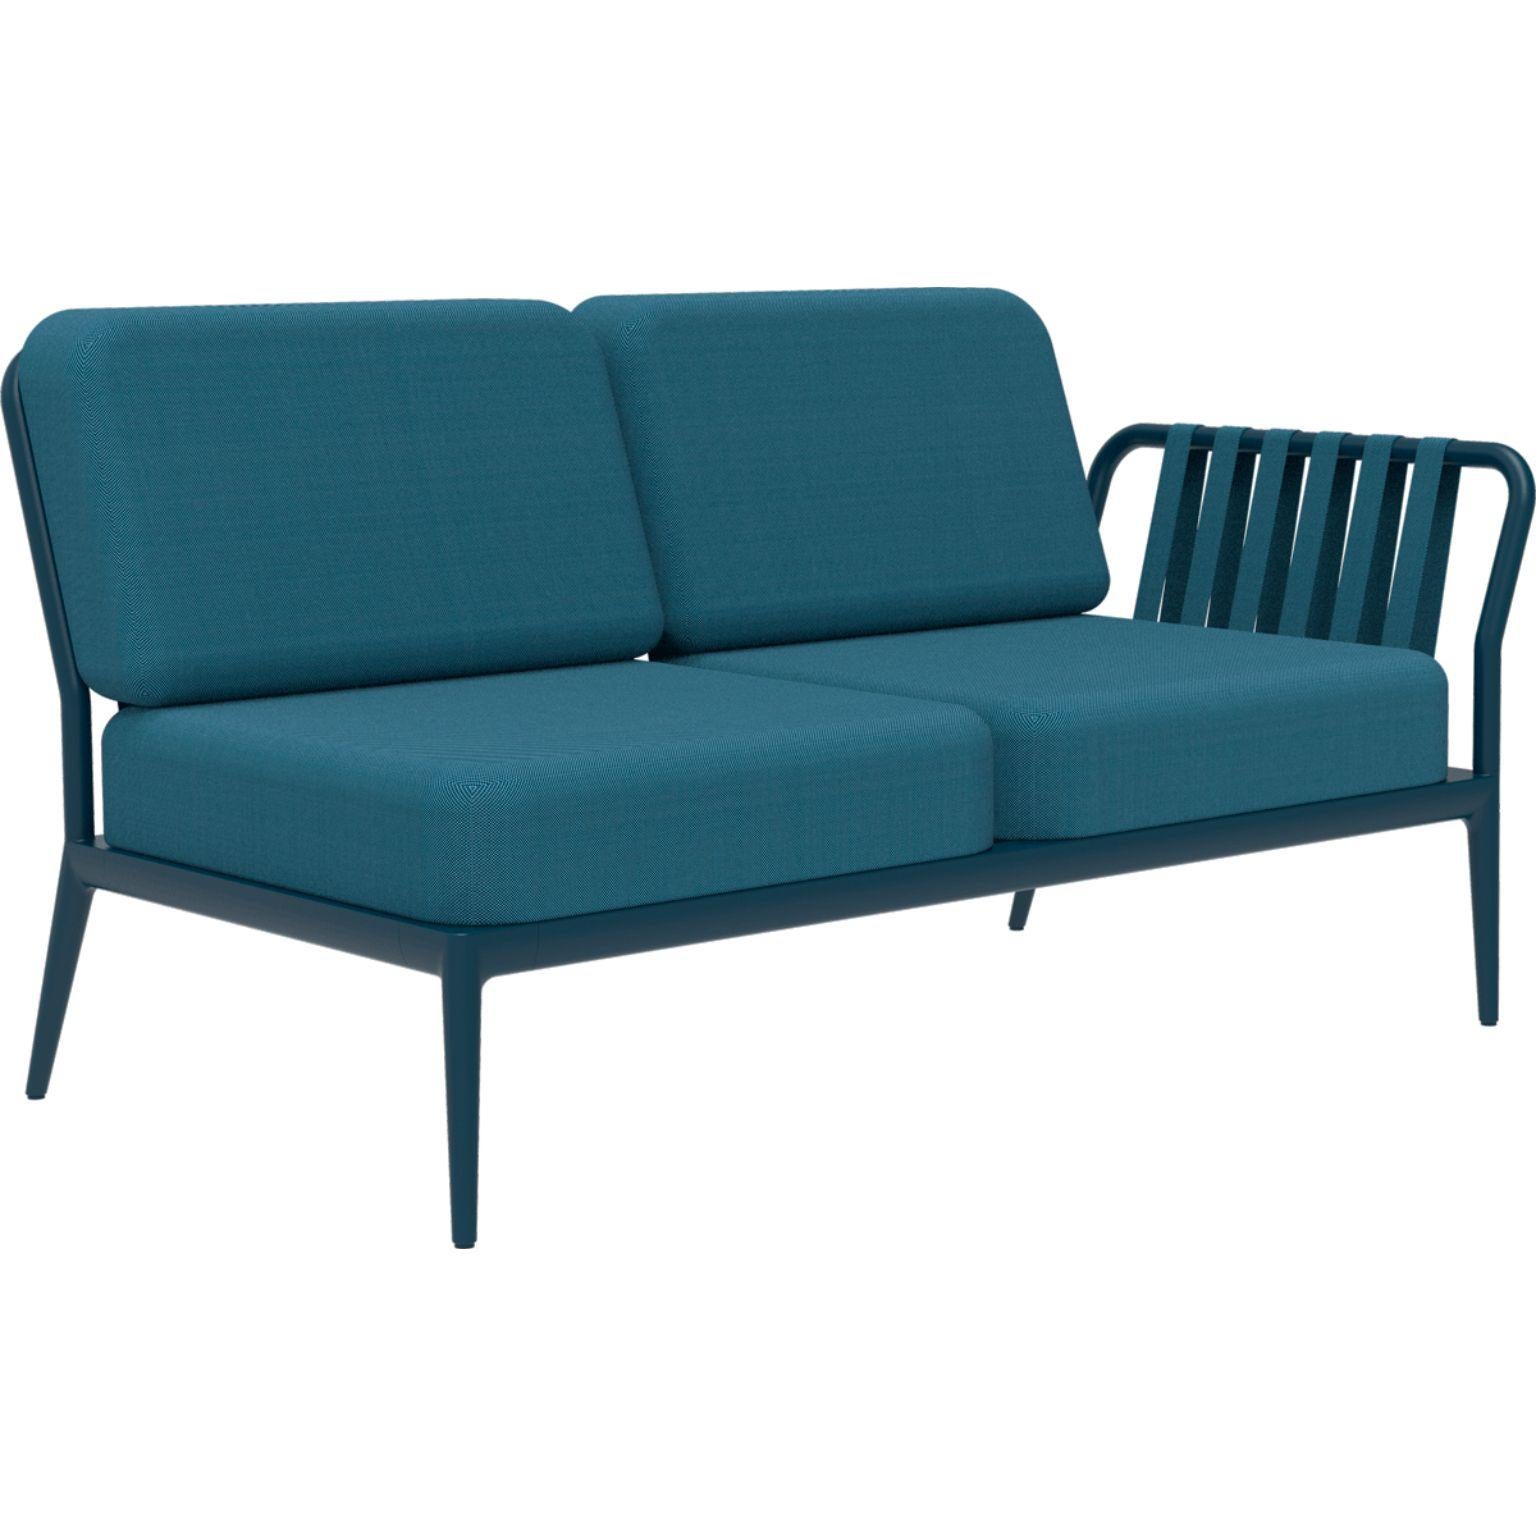 Ribbons Navy Double Left Modular sofa by MOWEE
Dimensions: D83 x W148 x H81 cm (seat height 42 cm).
Material: Aluminium and upholstery.
Weight: 29 kg
Also available in different colors and finishes.

An unmistakable collection for its beauty